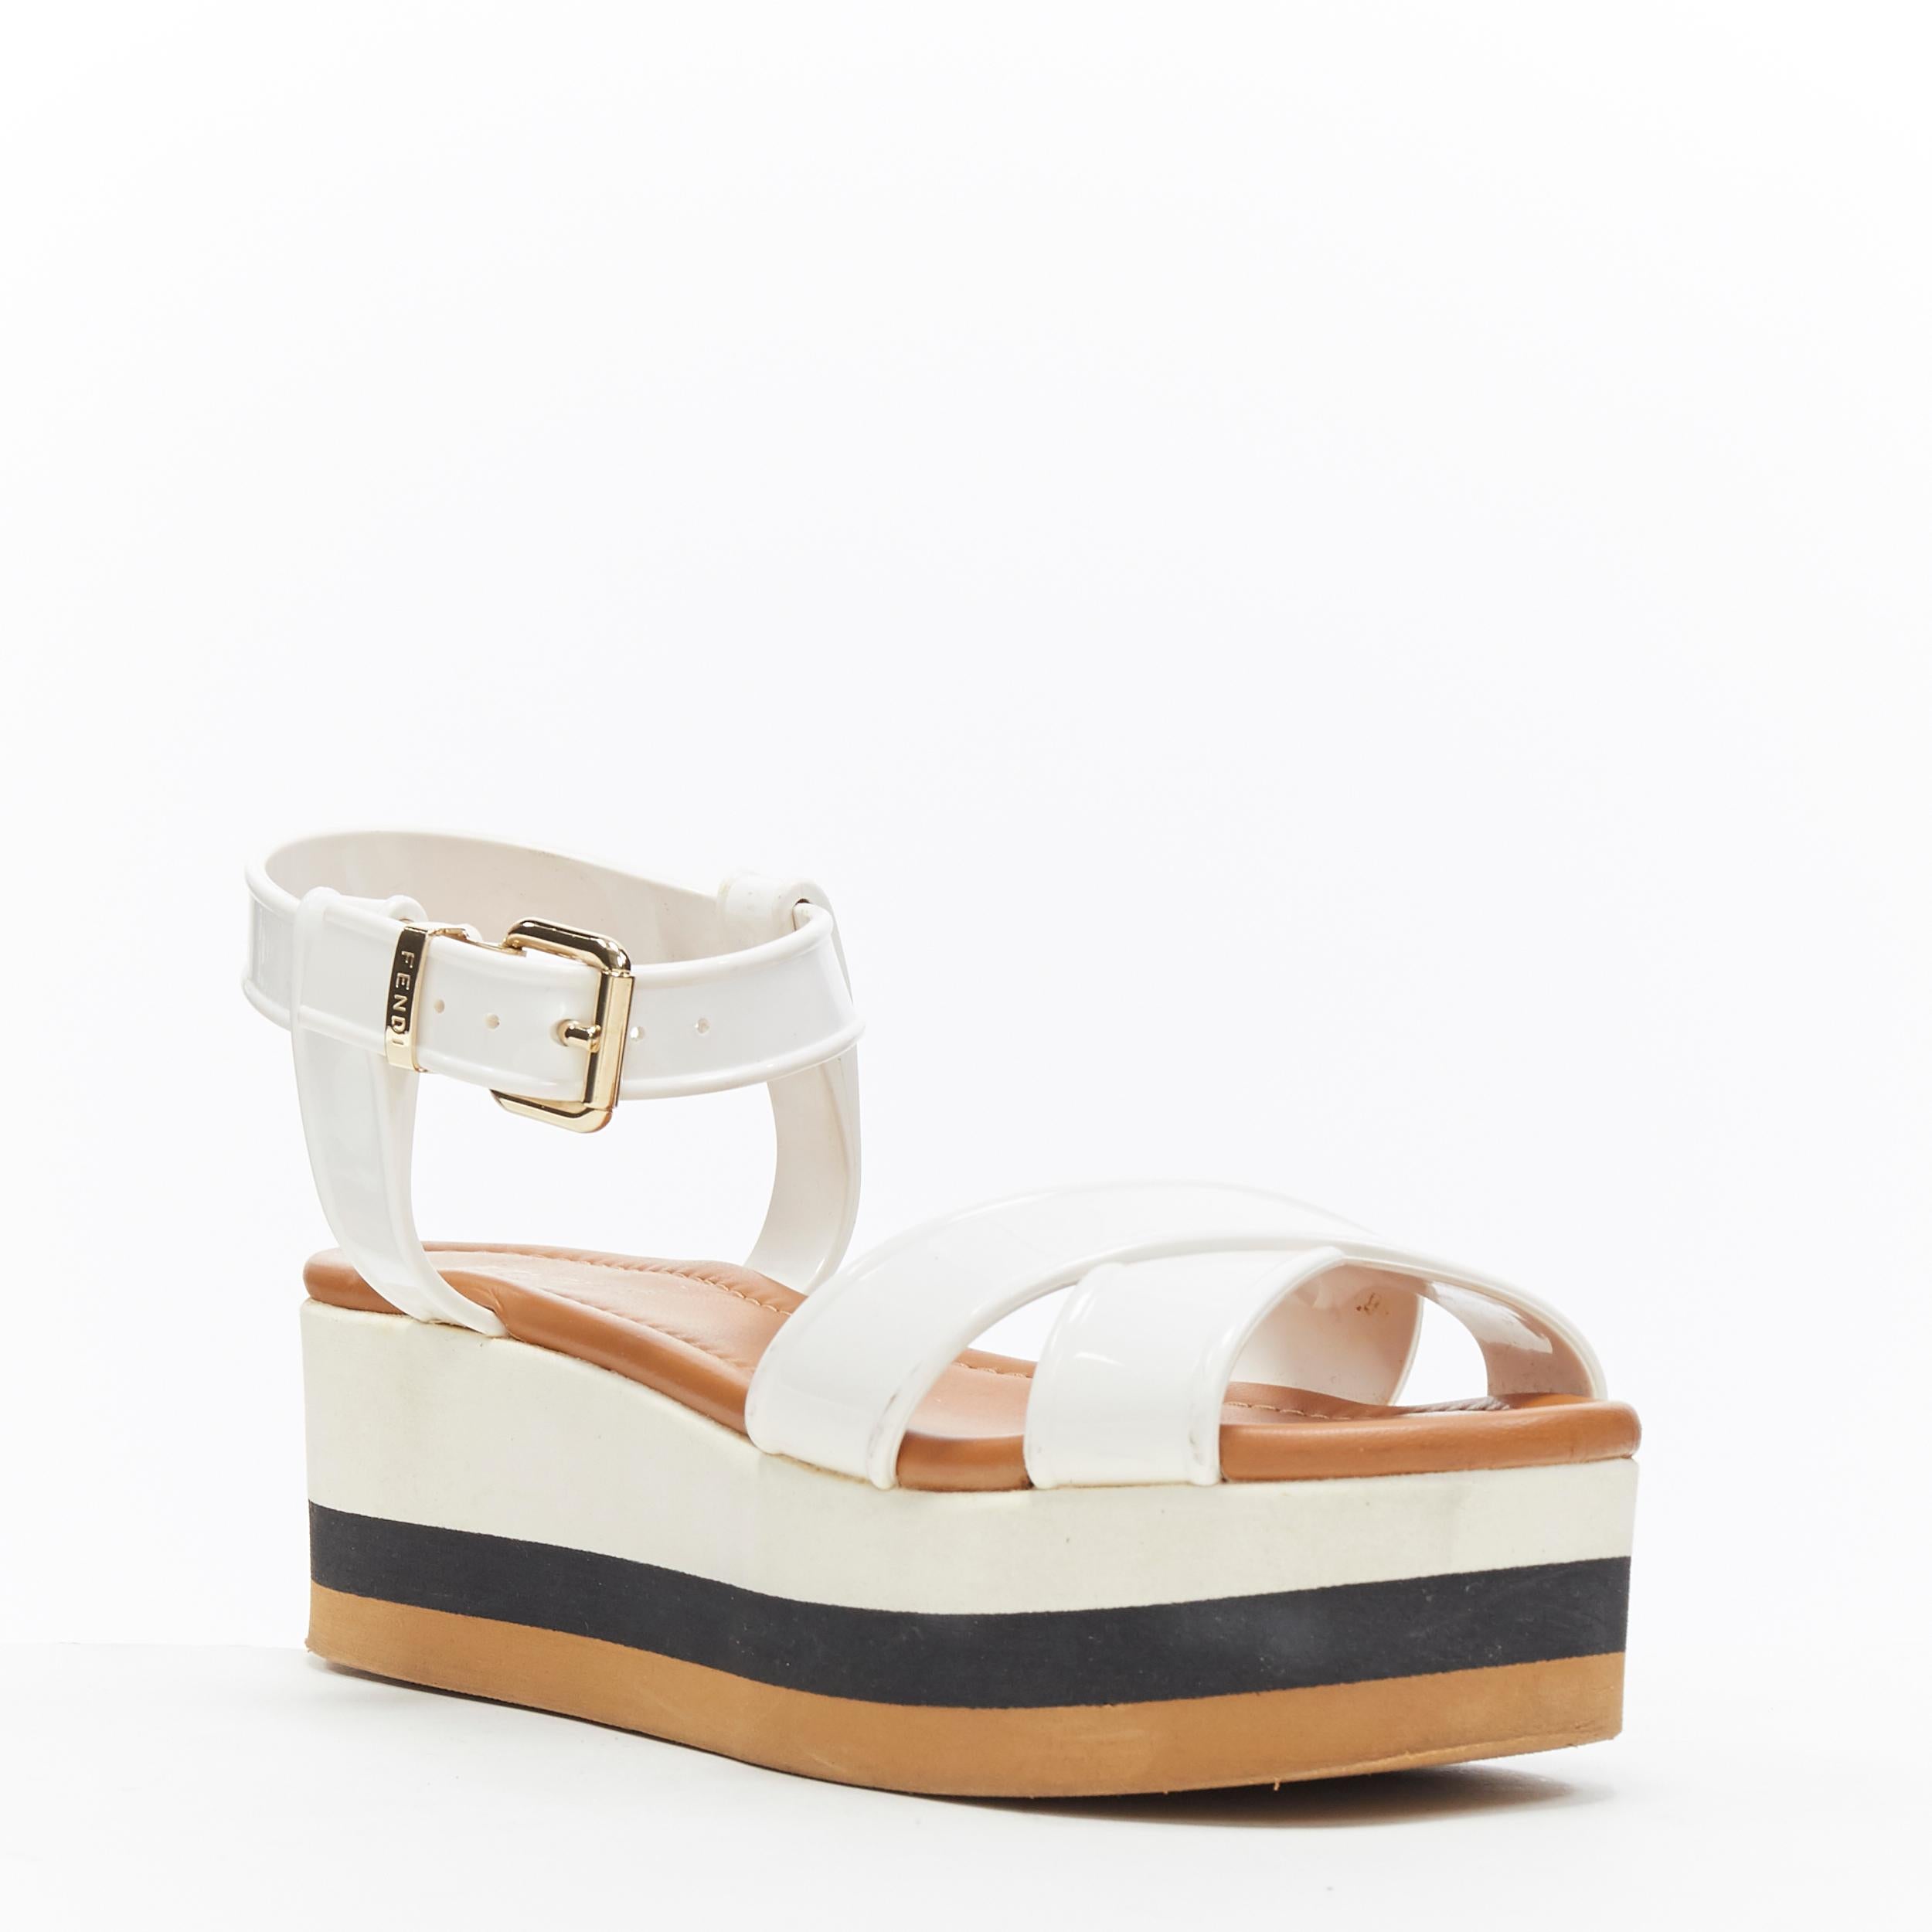 FENDI white jelly rubber ankle strap beige tricolor flat platform sandals EU36
Brand: Fendi
Model Name / Style: Flatform
Material: PVC
Color: White
Pattern: Solid
Closure: Ankle strap
Extra Detail: Low (1-1.9 in) heel height. Open toe.
Made in: